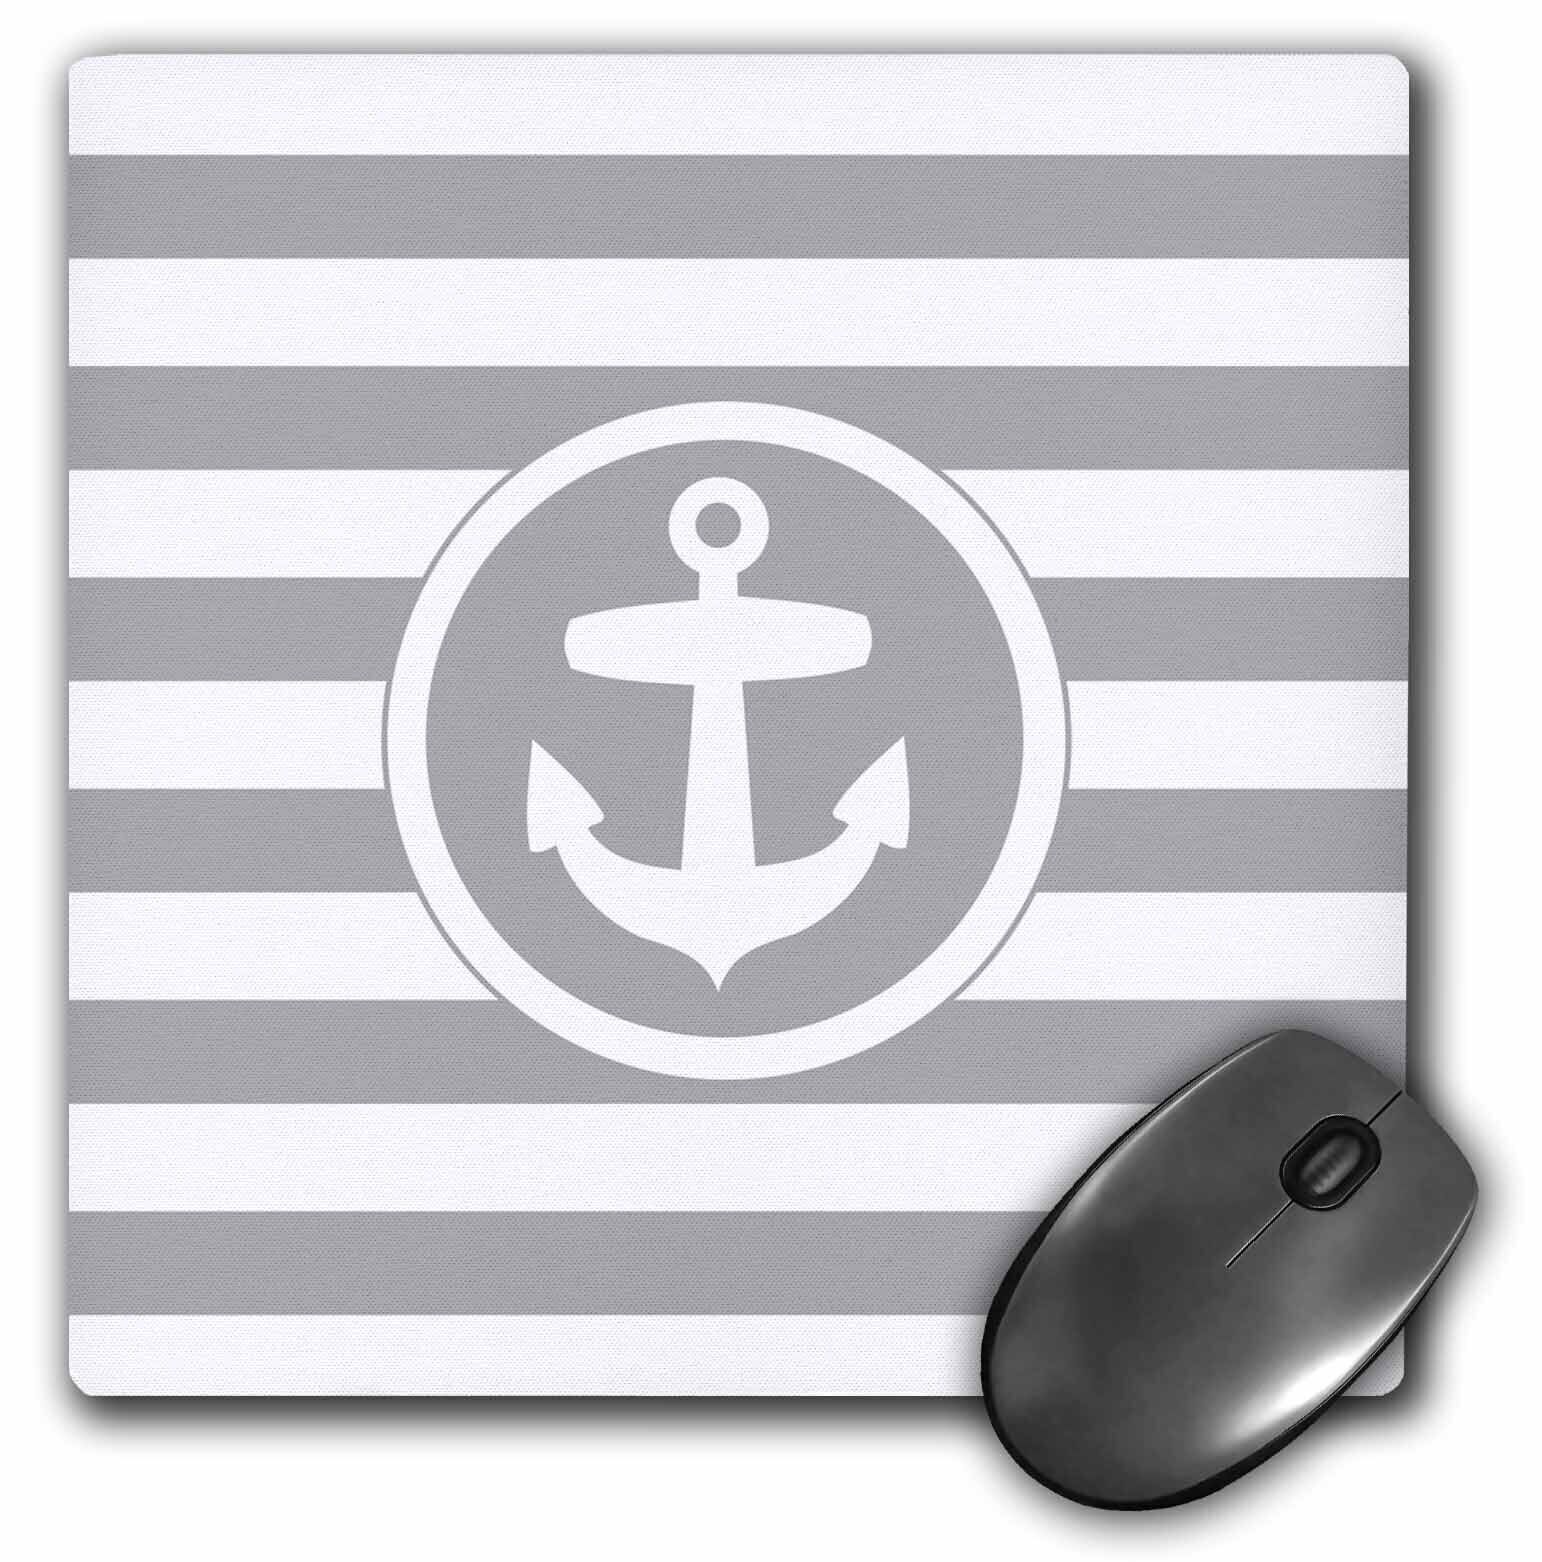 3dRose Nautical anchor circle design on grey and white striped Gray Stripes Mous